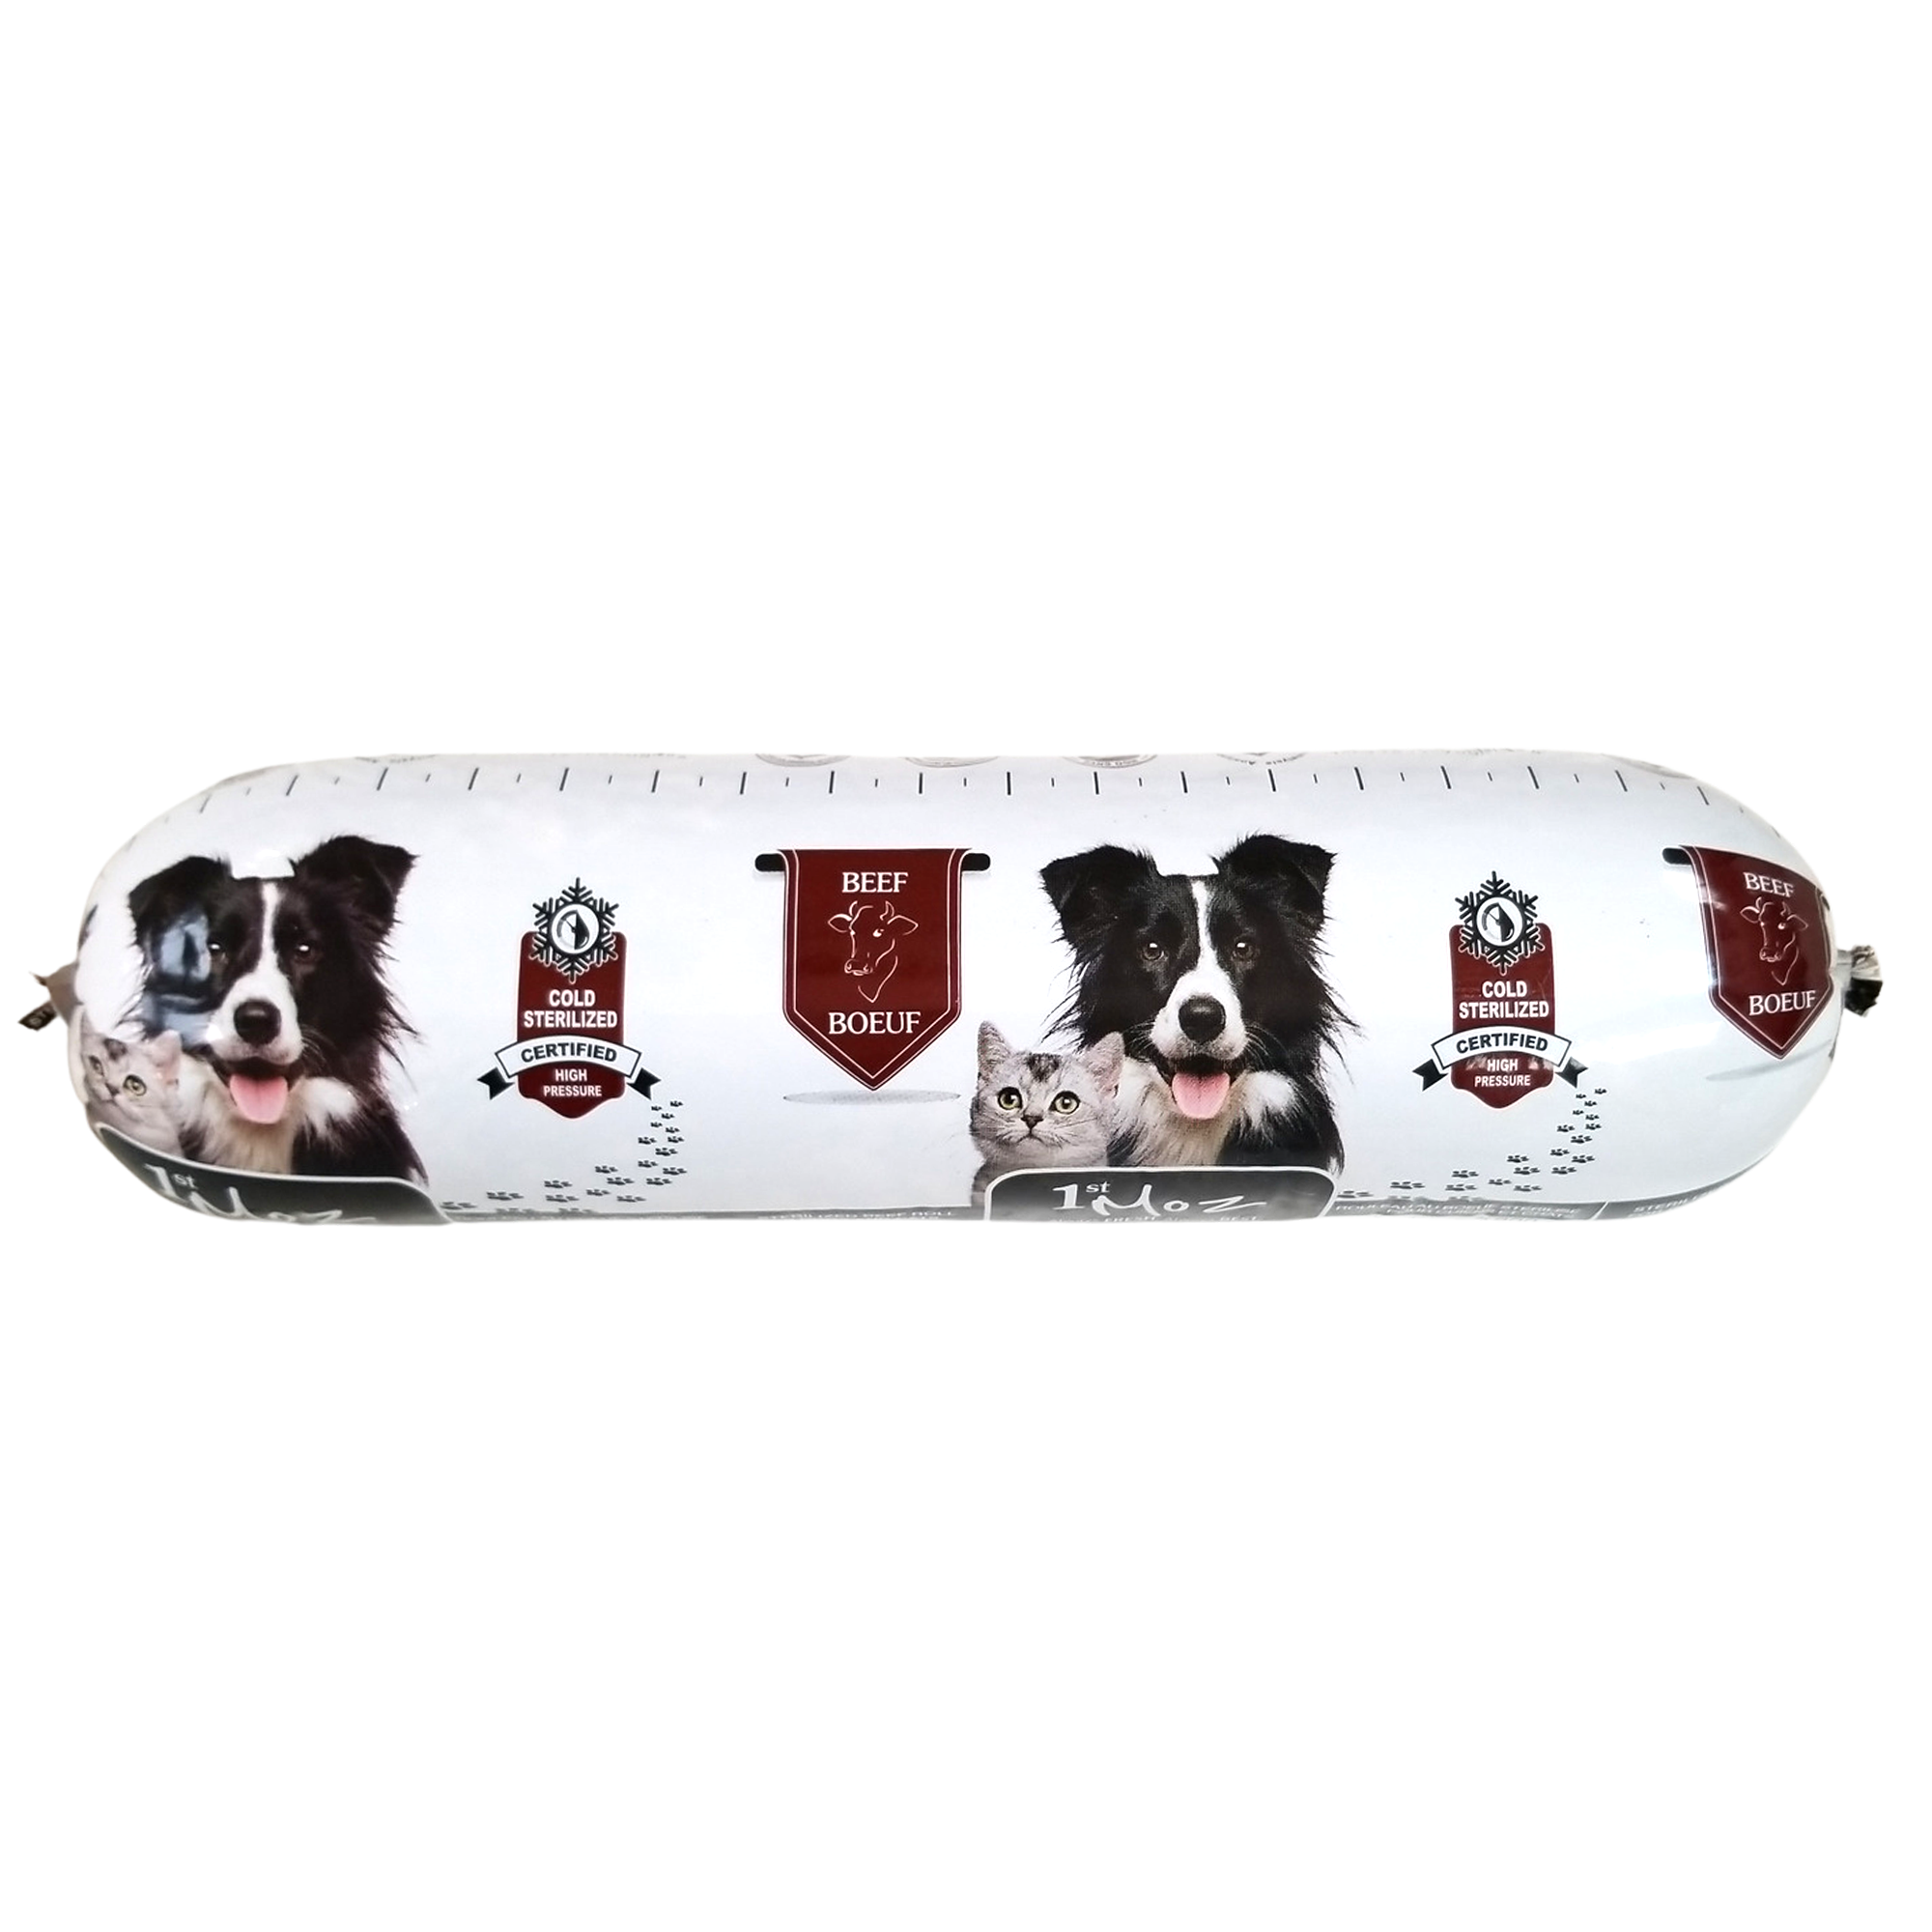 Moz 1st Sterilized Beef Roll For Dogs & Cats, 900g